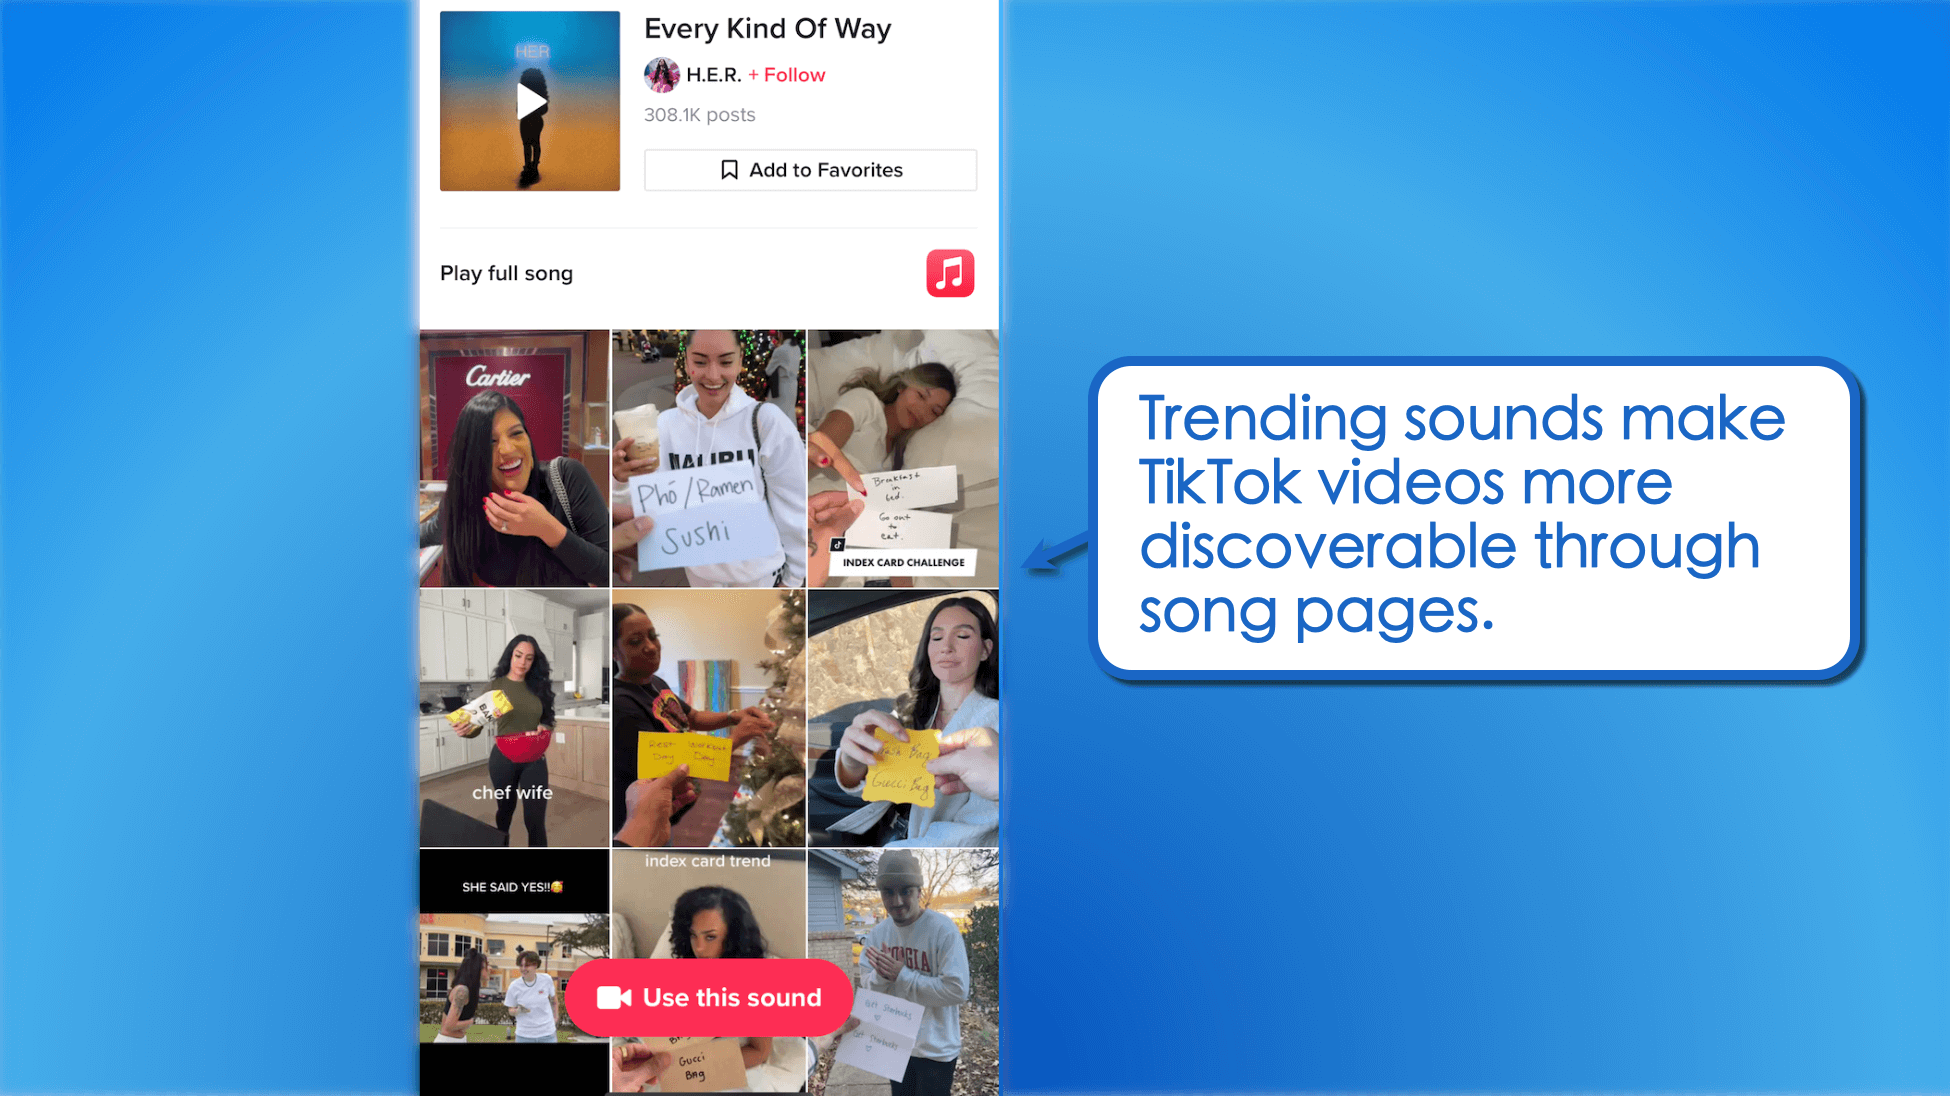 Get trending audio suggestions in a snap with Vista Social. 